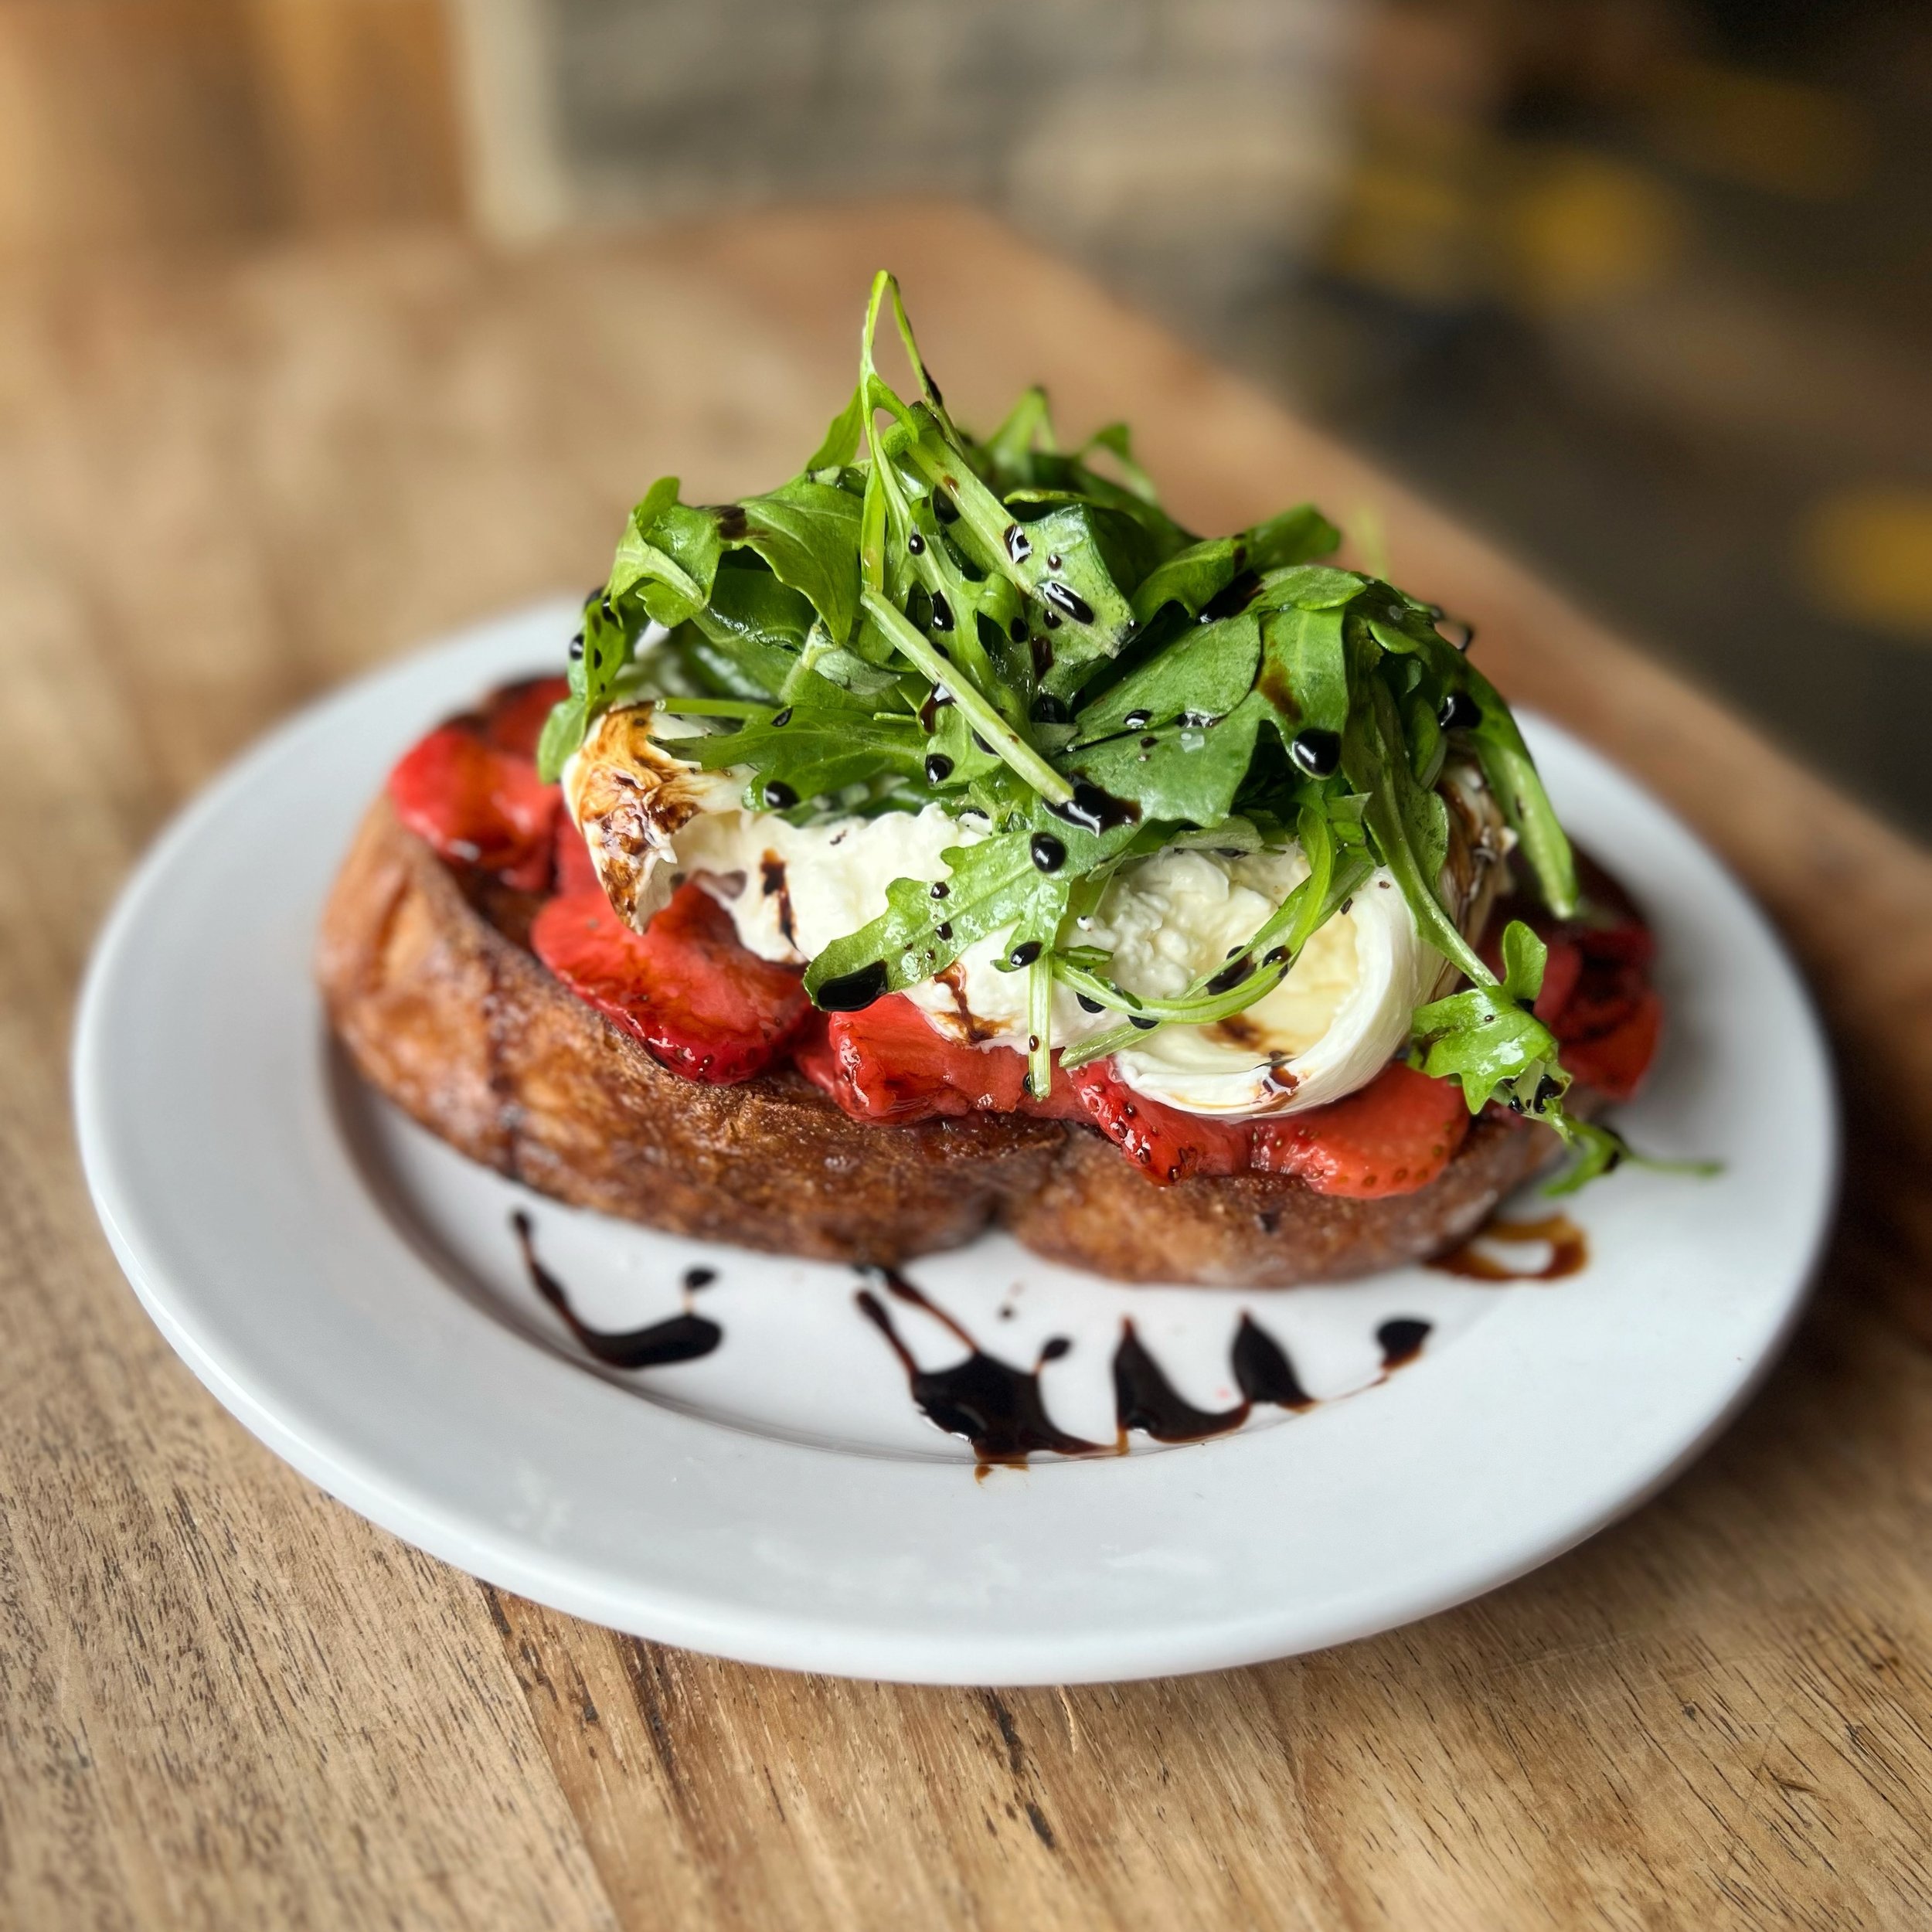 Burrata makes everything better!  With strawberry, arugula, basil &amp; balsamic reduction on house ciabatta.  On our dinner menu 🍓